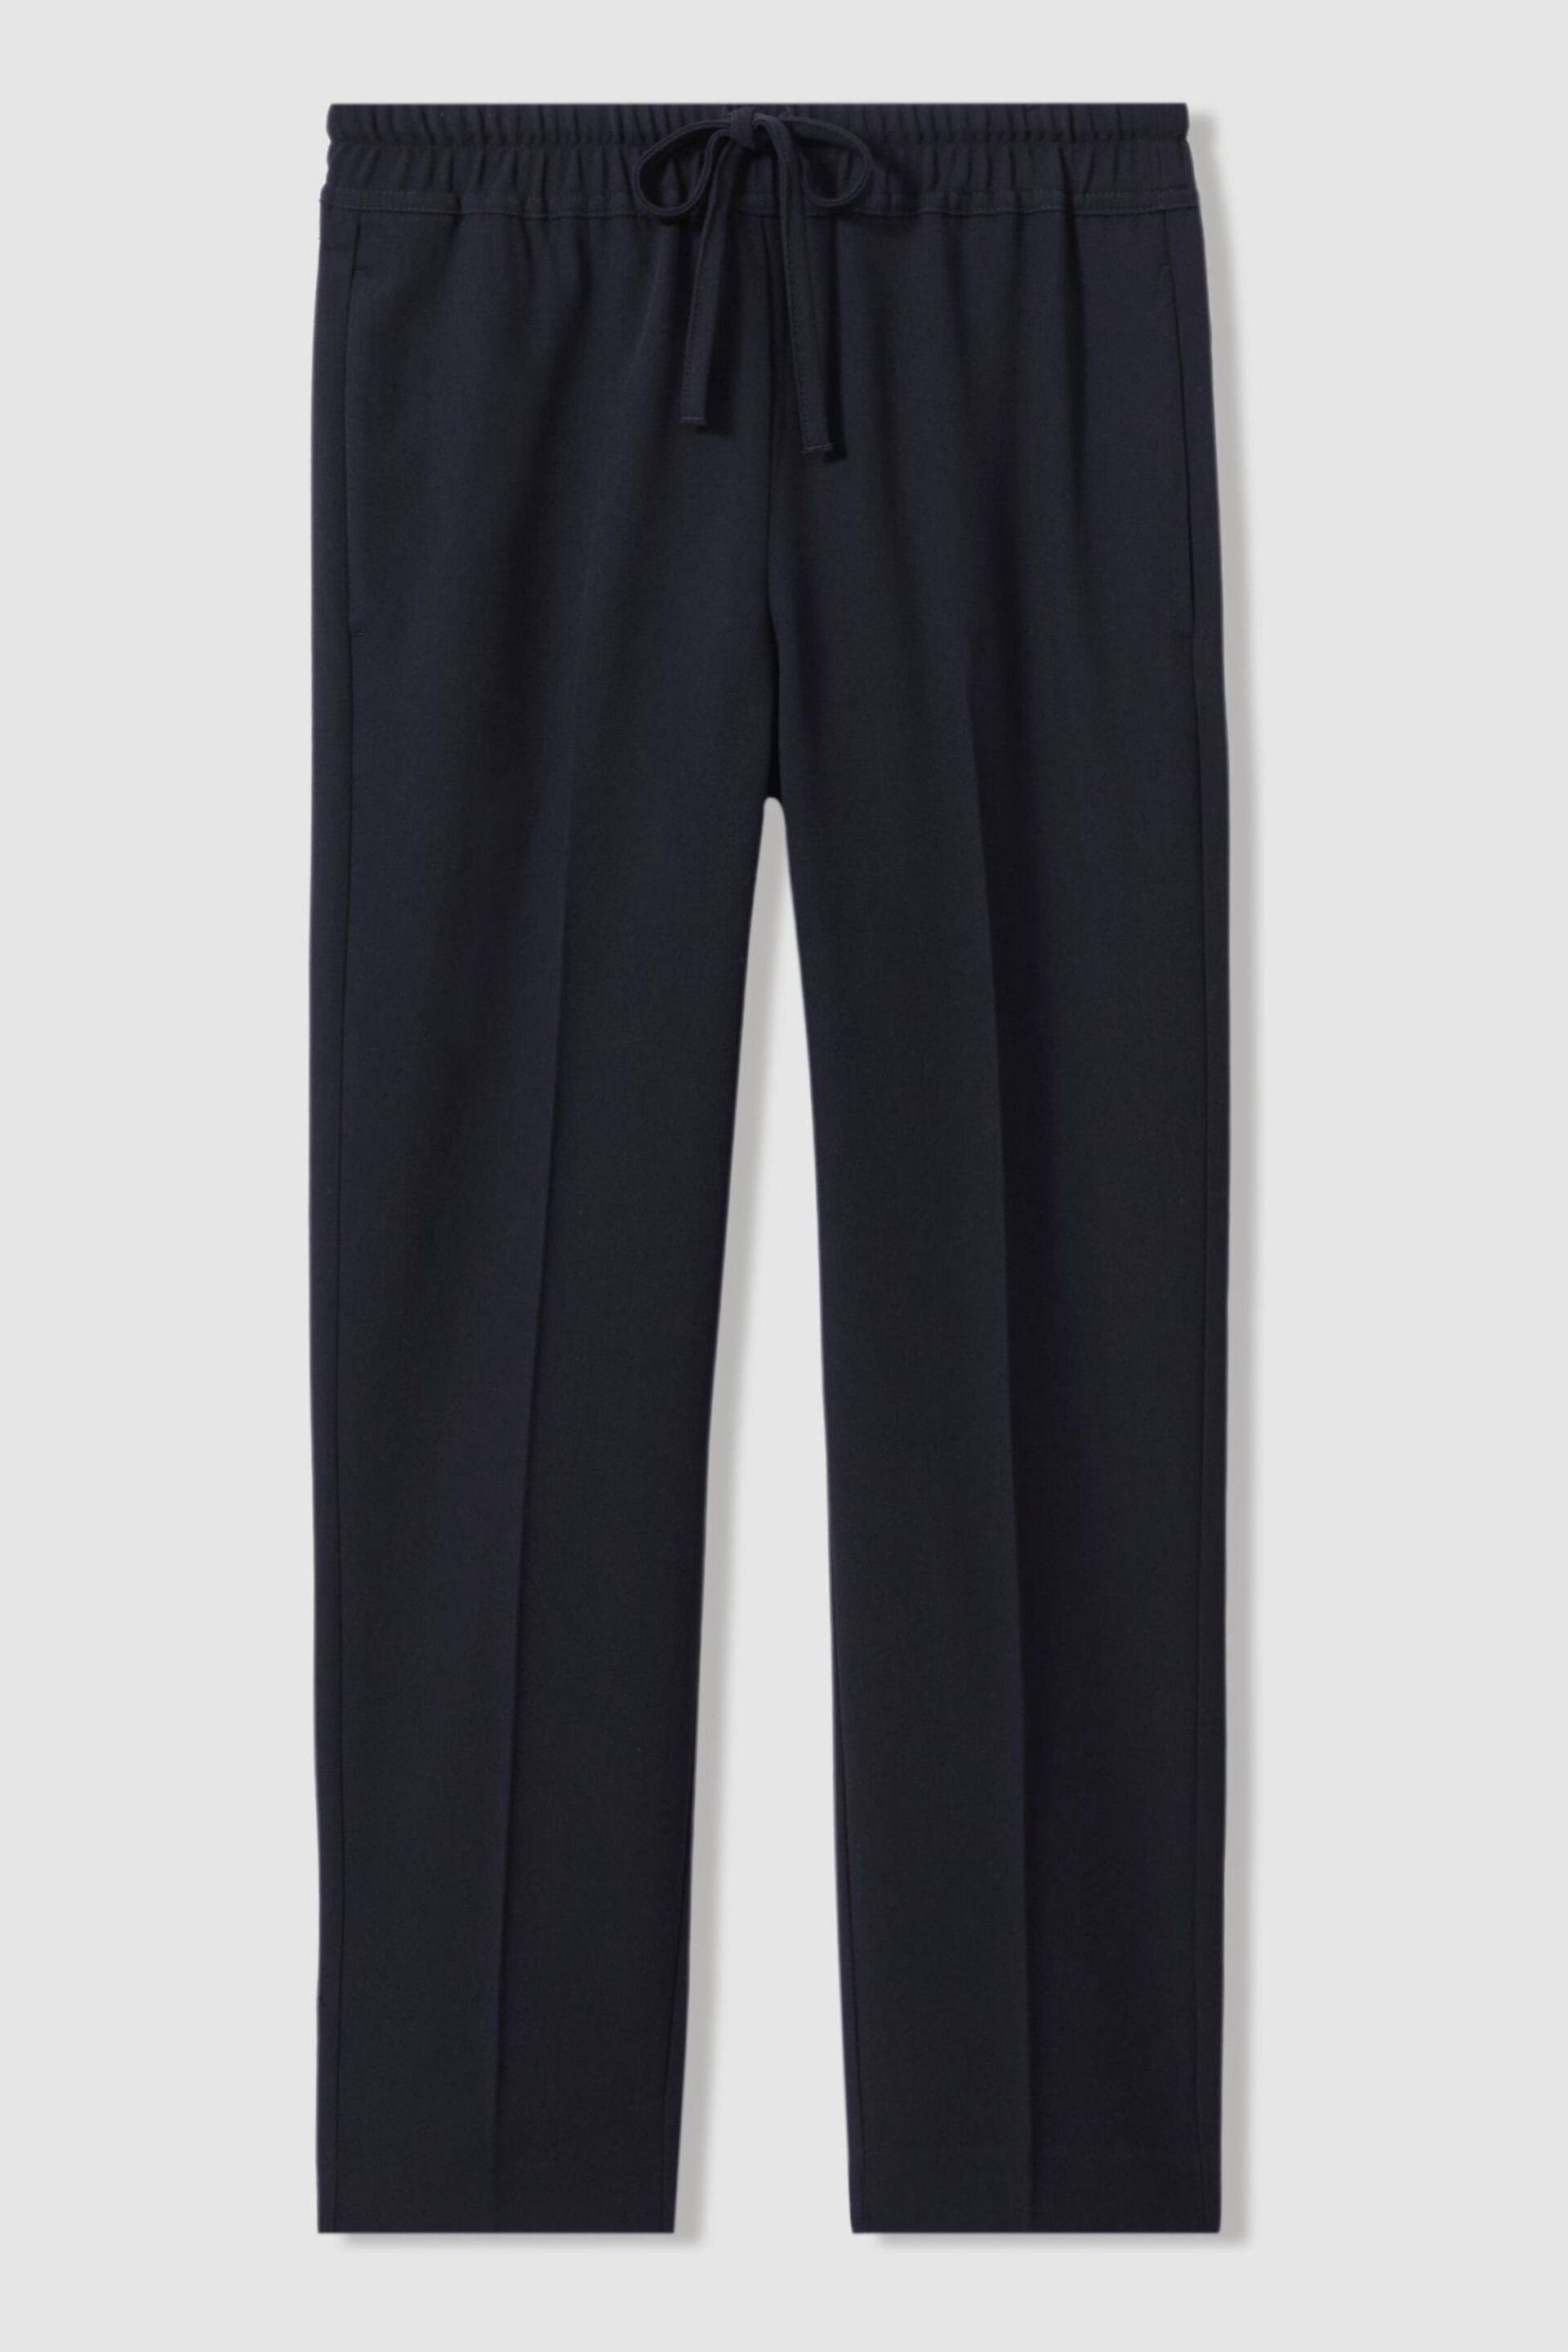 Reiss Navy Hailey Petite Tapered Pull On Trousers - Image 2 of 6